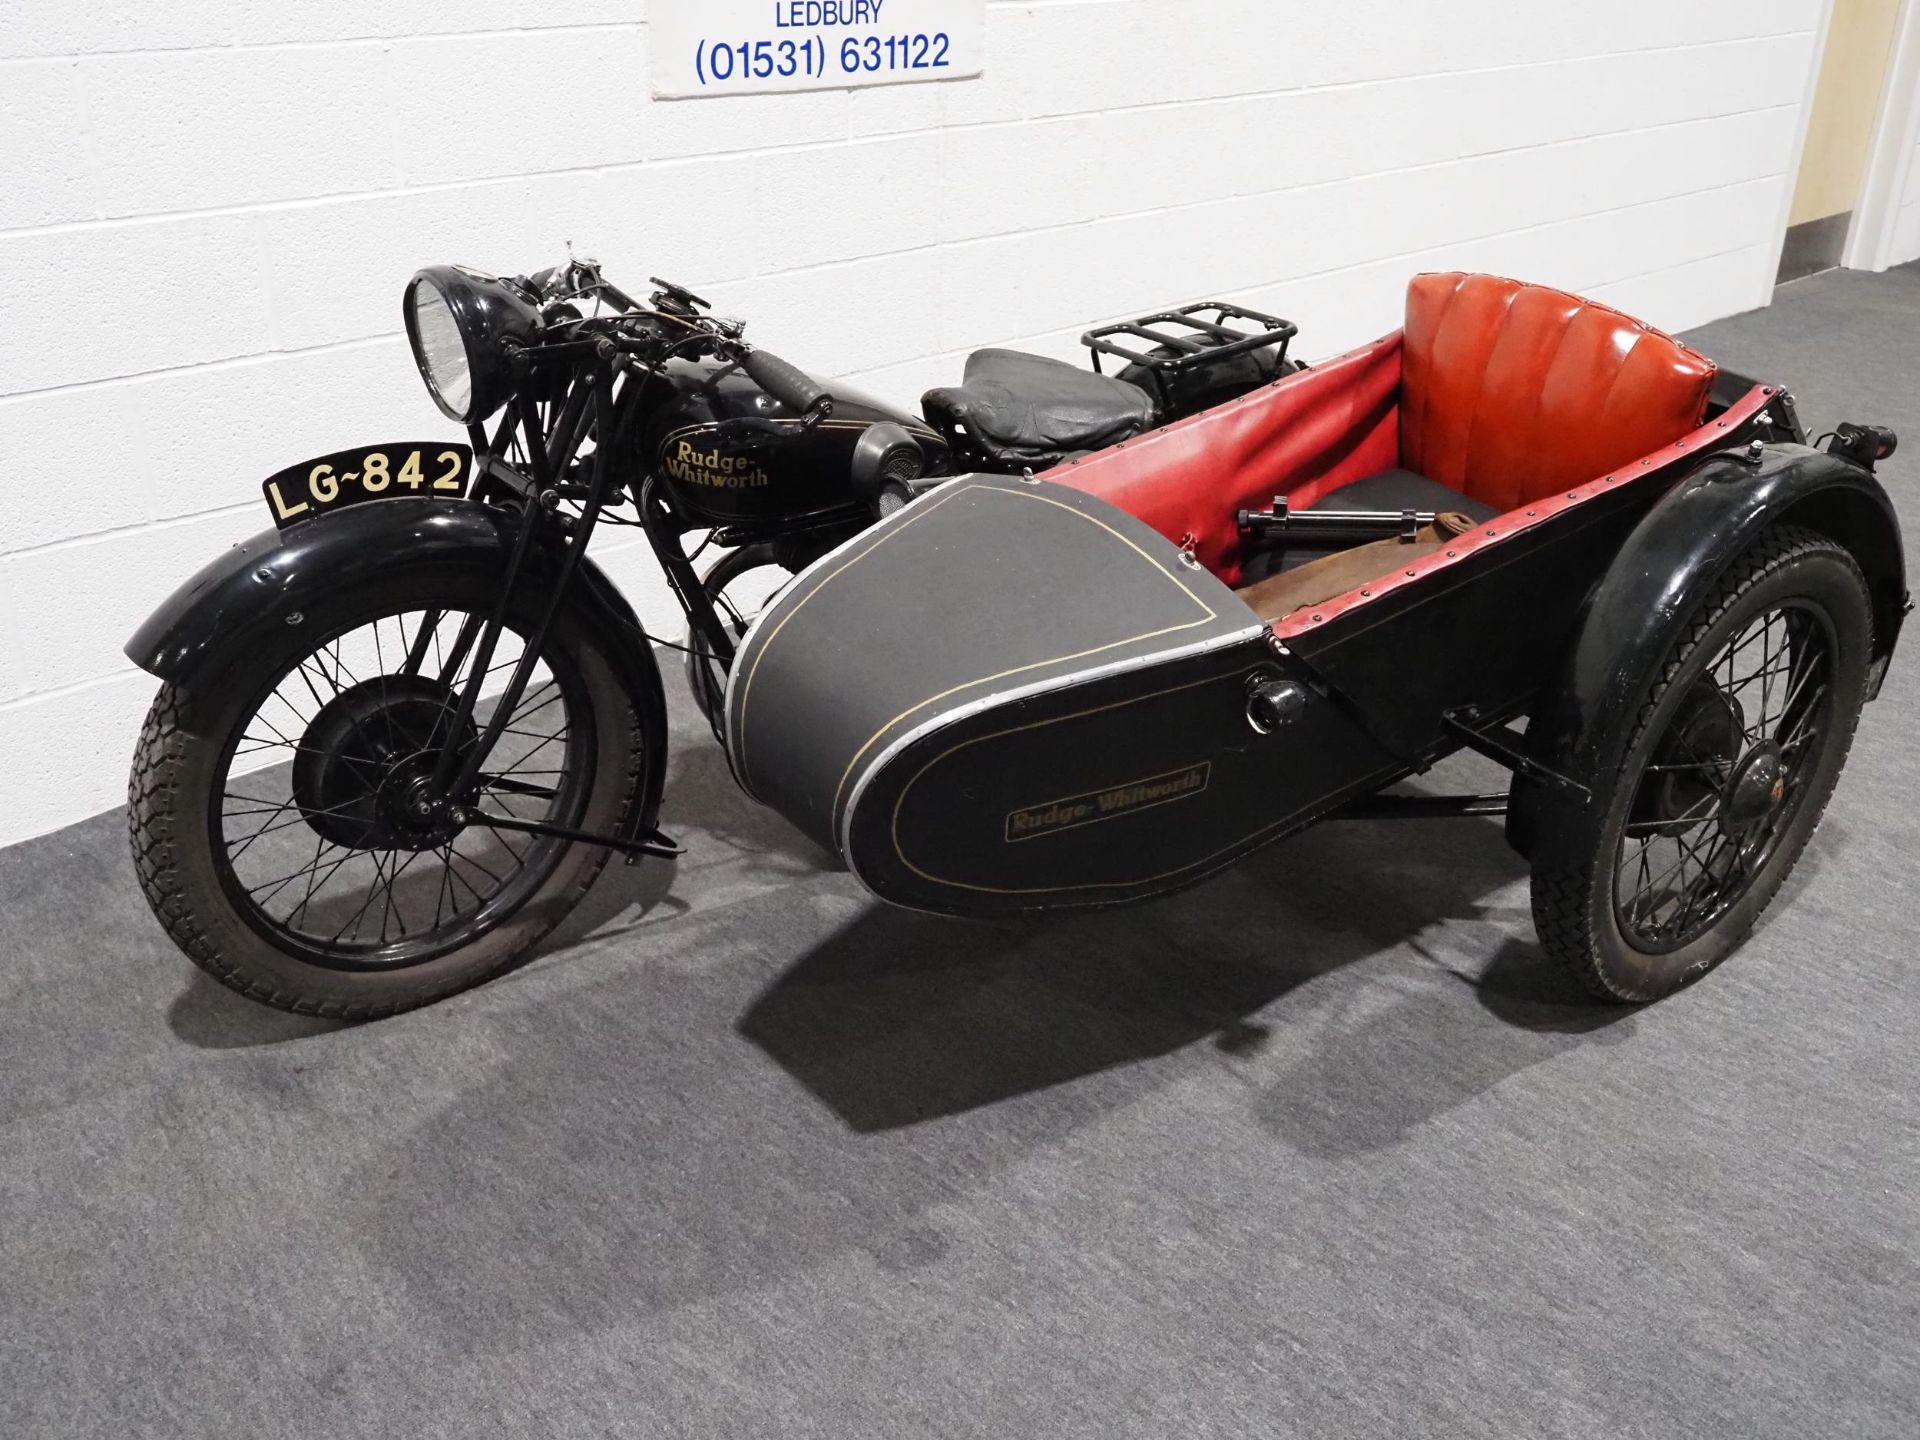 Rudge-Whitworth side car combination motorcycle. 499cc. 1929. Engine No. 408 Frame No. 30987 The - Image 12 of 14